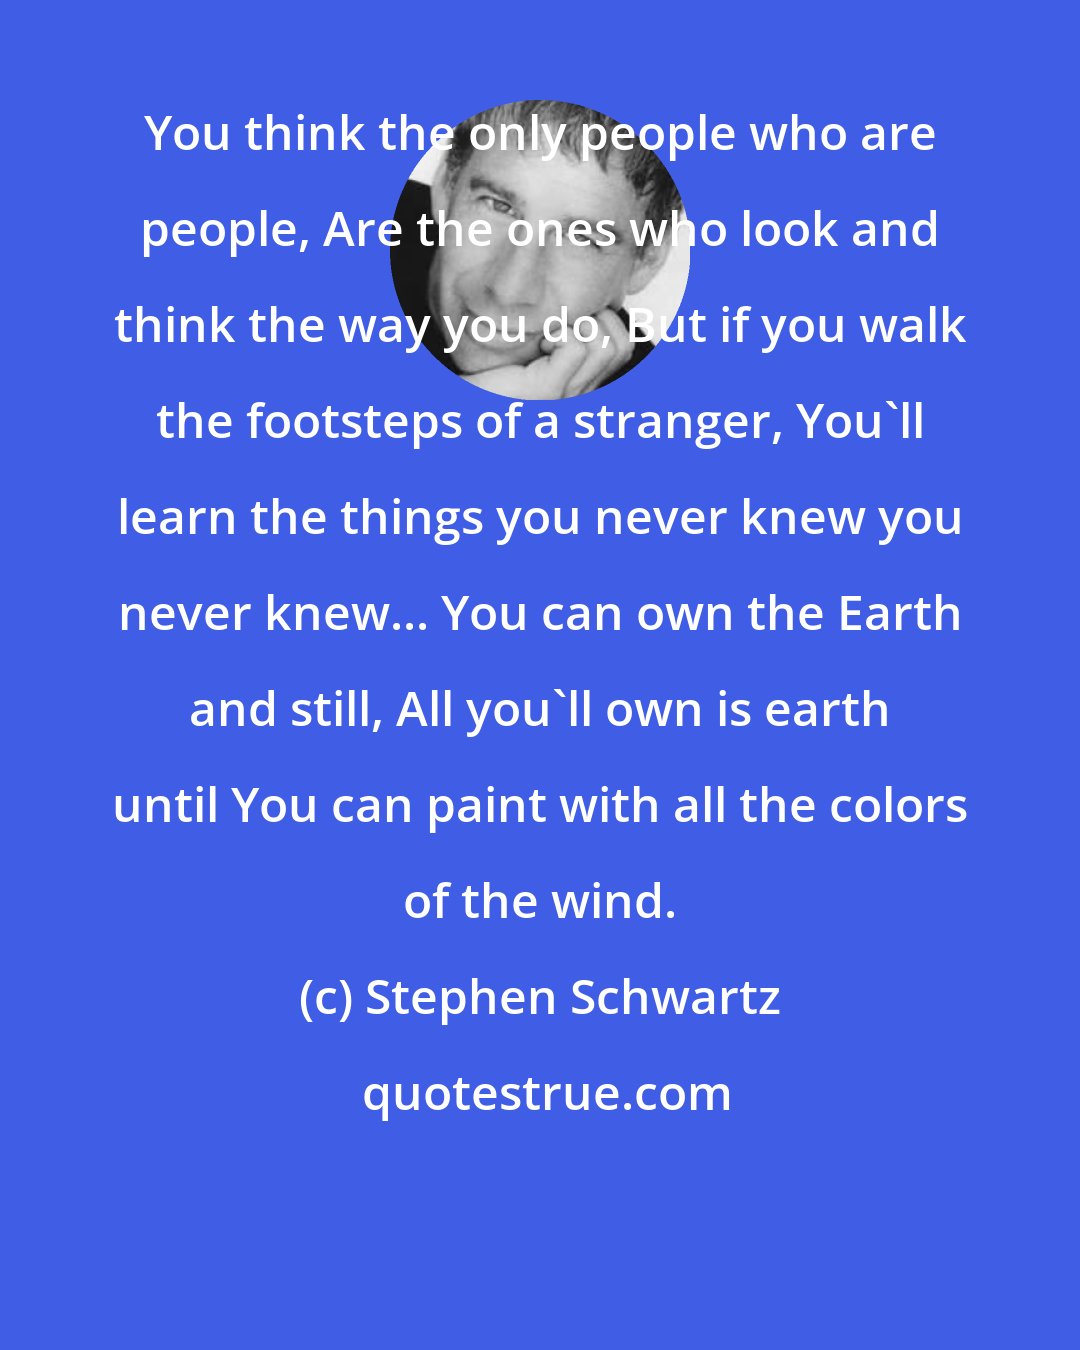 Stephen Schwartz: You think the only people who are people, Are the ones who look and think the way you do, But if you walk the footsteps of a stranger, You'll learn the things you never knew you never knew... You can own the Earth and still, All you'll own is earth until You can paint with all the colors of the wind.